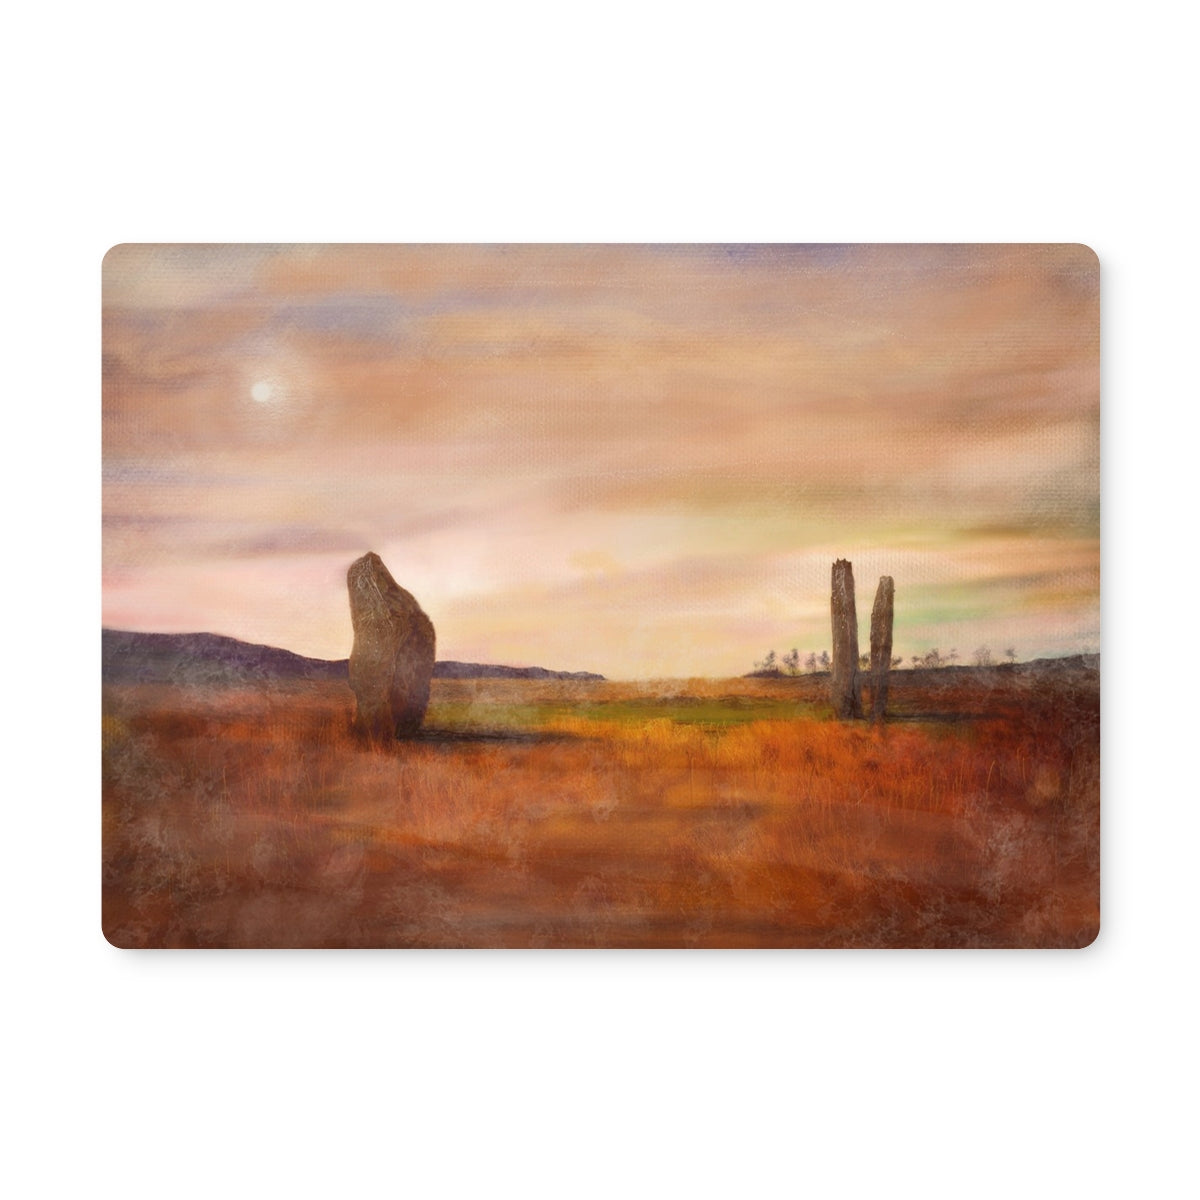 Machrie Moor Arran Art Gifts Placemat-Placemats-Arran Art Gallery-4 Placemats-Paintings, Prints, Homeware, Art Gifts From Scotland By Scottish Artist Kevin Hunter